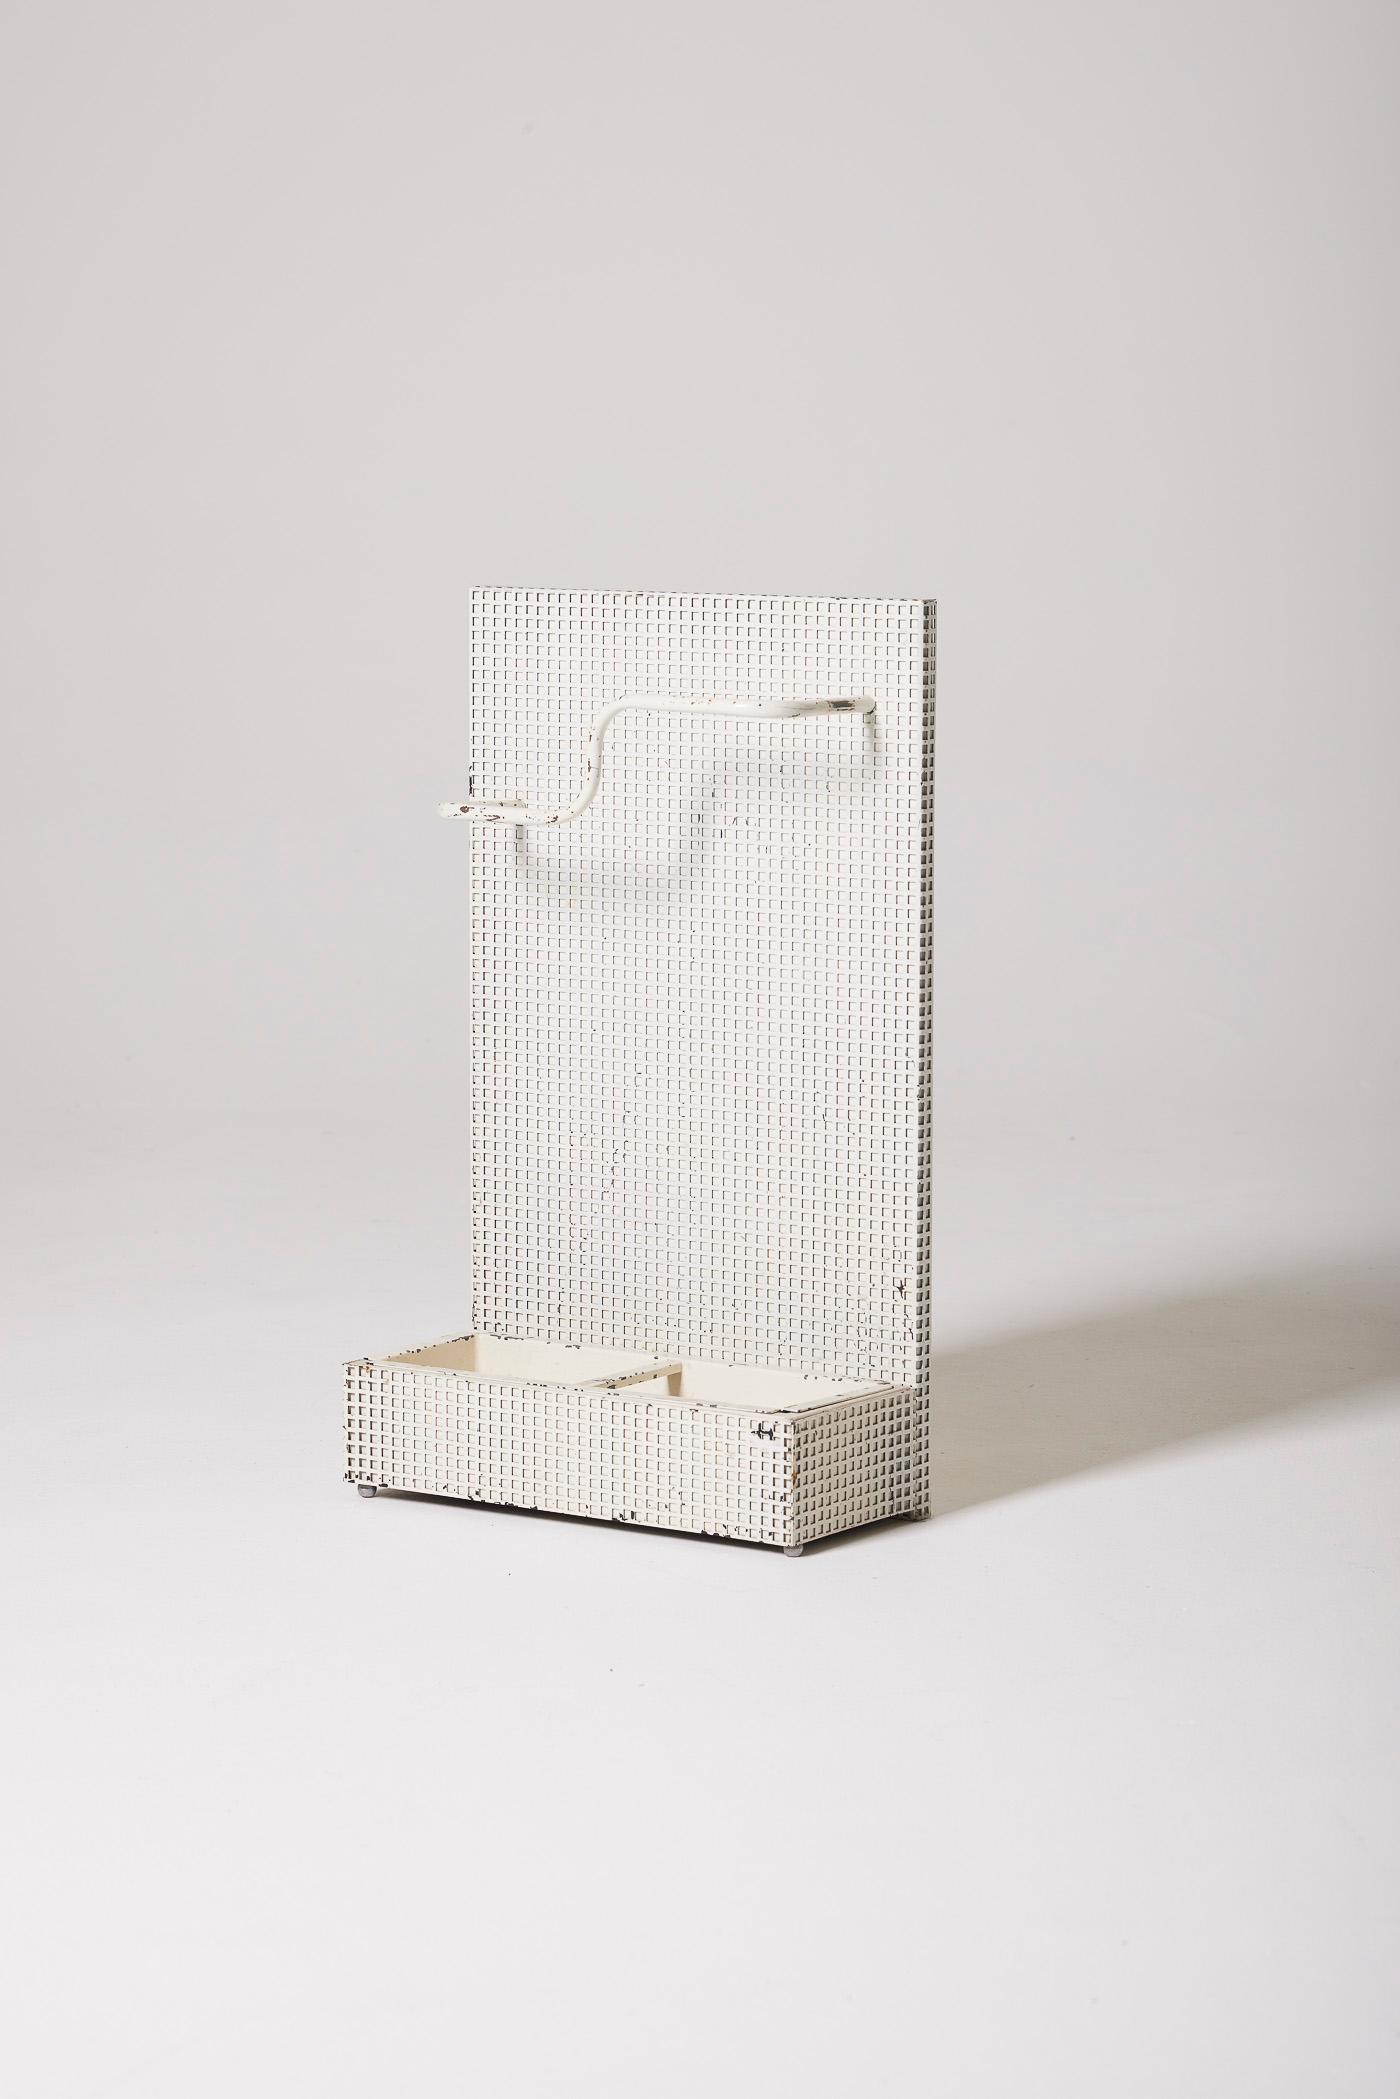 Umbrella Stand by designer Tjerk Reijenga for Pilastro, 1960s. It is in perforated white metal in the style of designer Josef Hoffmann. Time-worn patina.
DV457